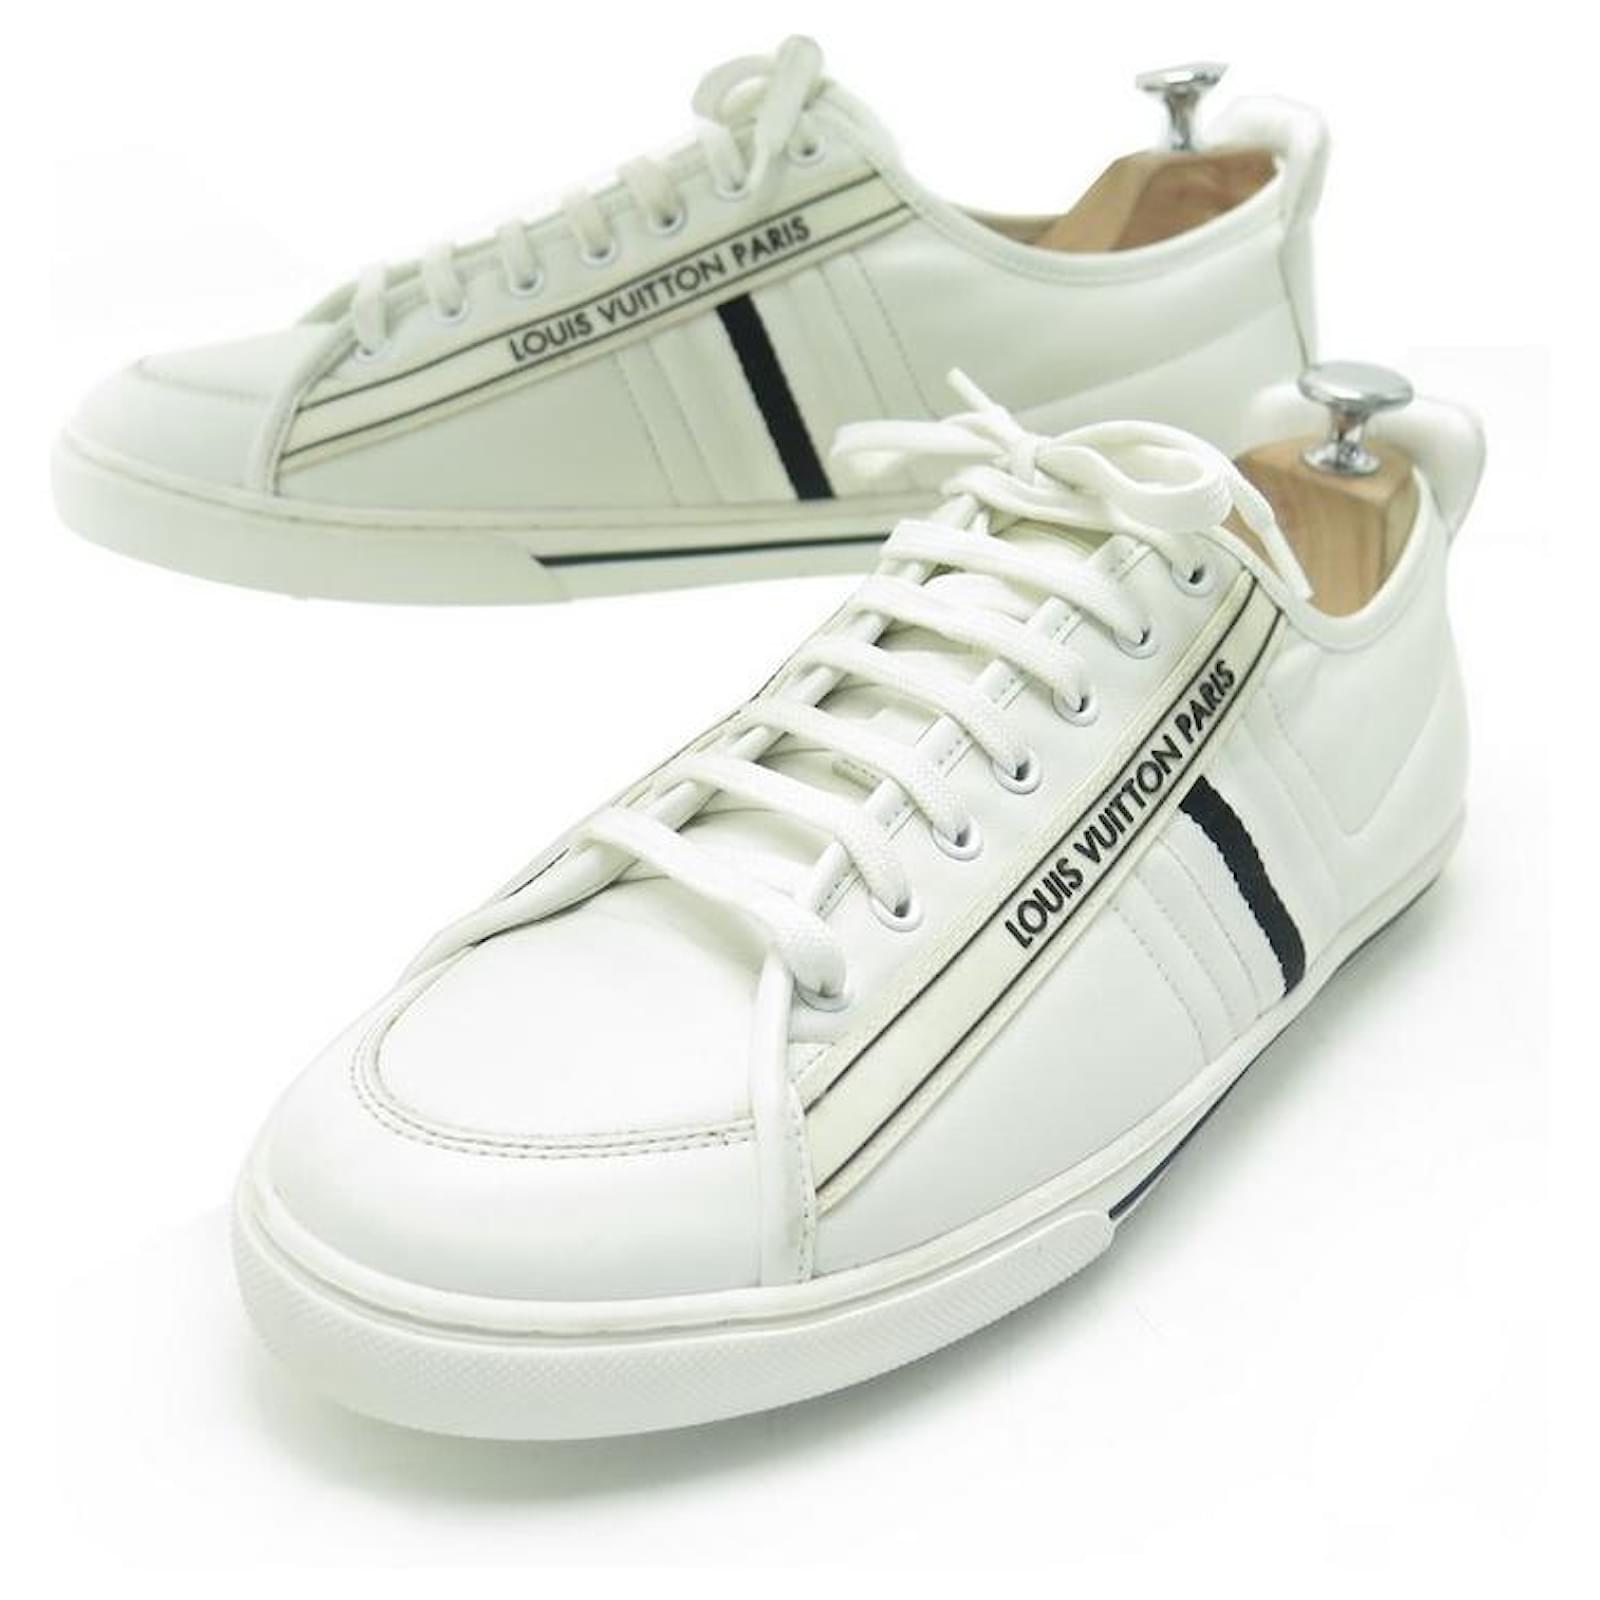 LOUIS VUITTON sneakers SHOES 9 43 IN WHITE LEATHER + BOX SNEAKERS